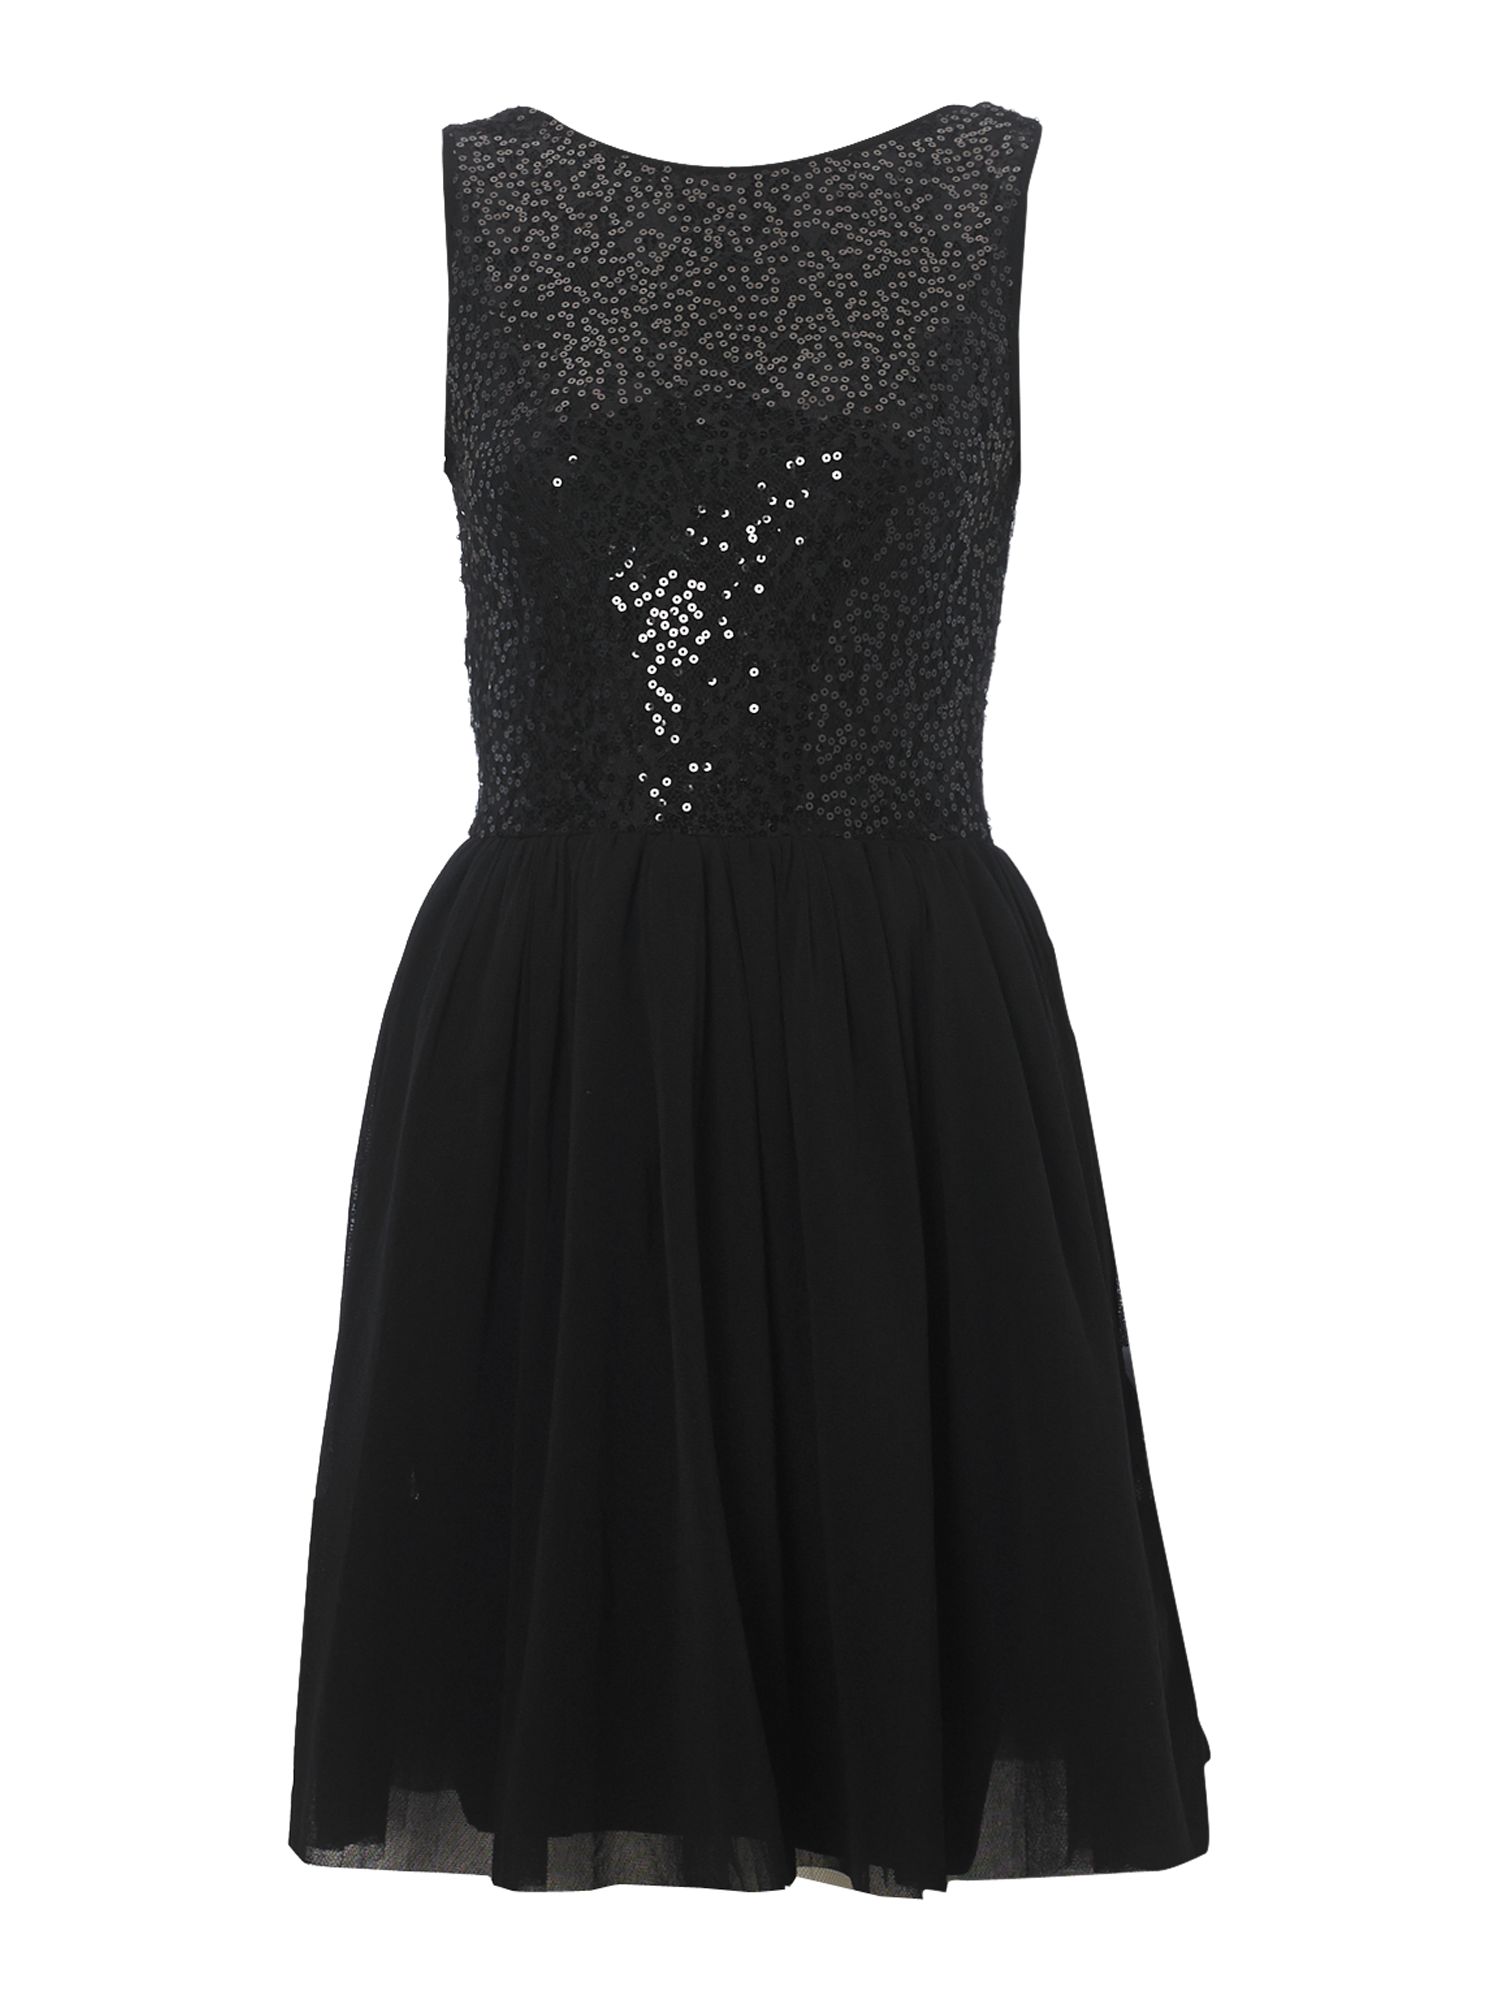 Therapy Sequin Tulle Skater Dress in Black | Lyst